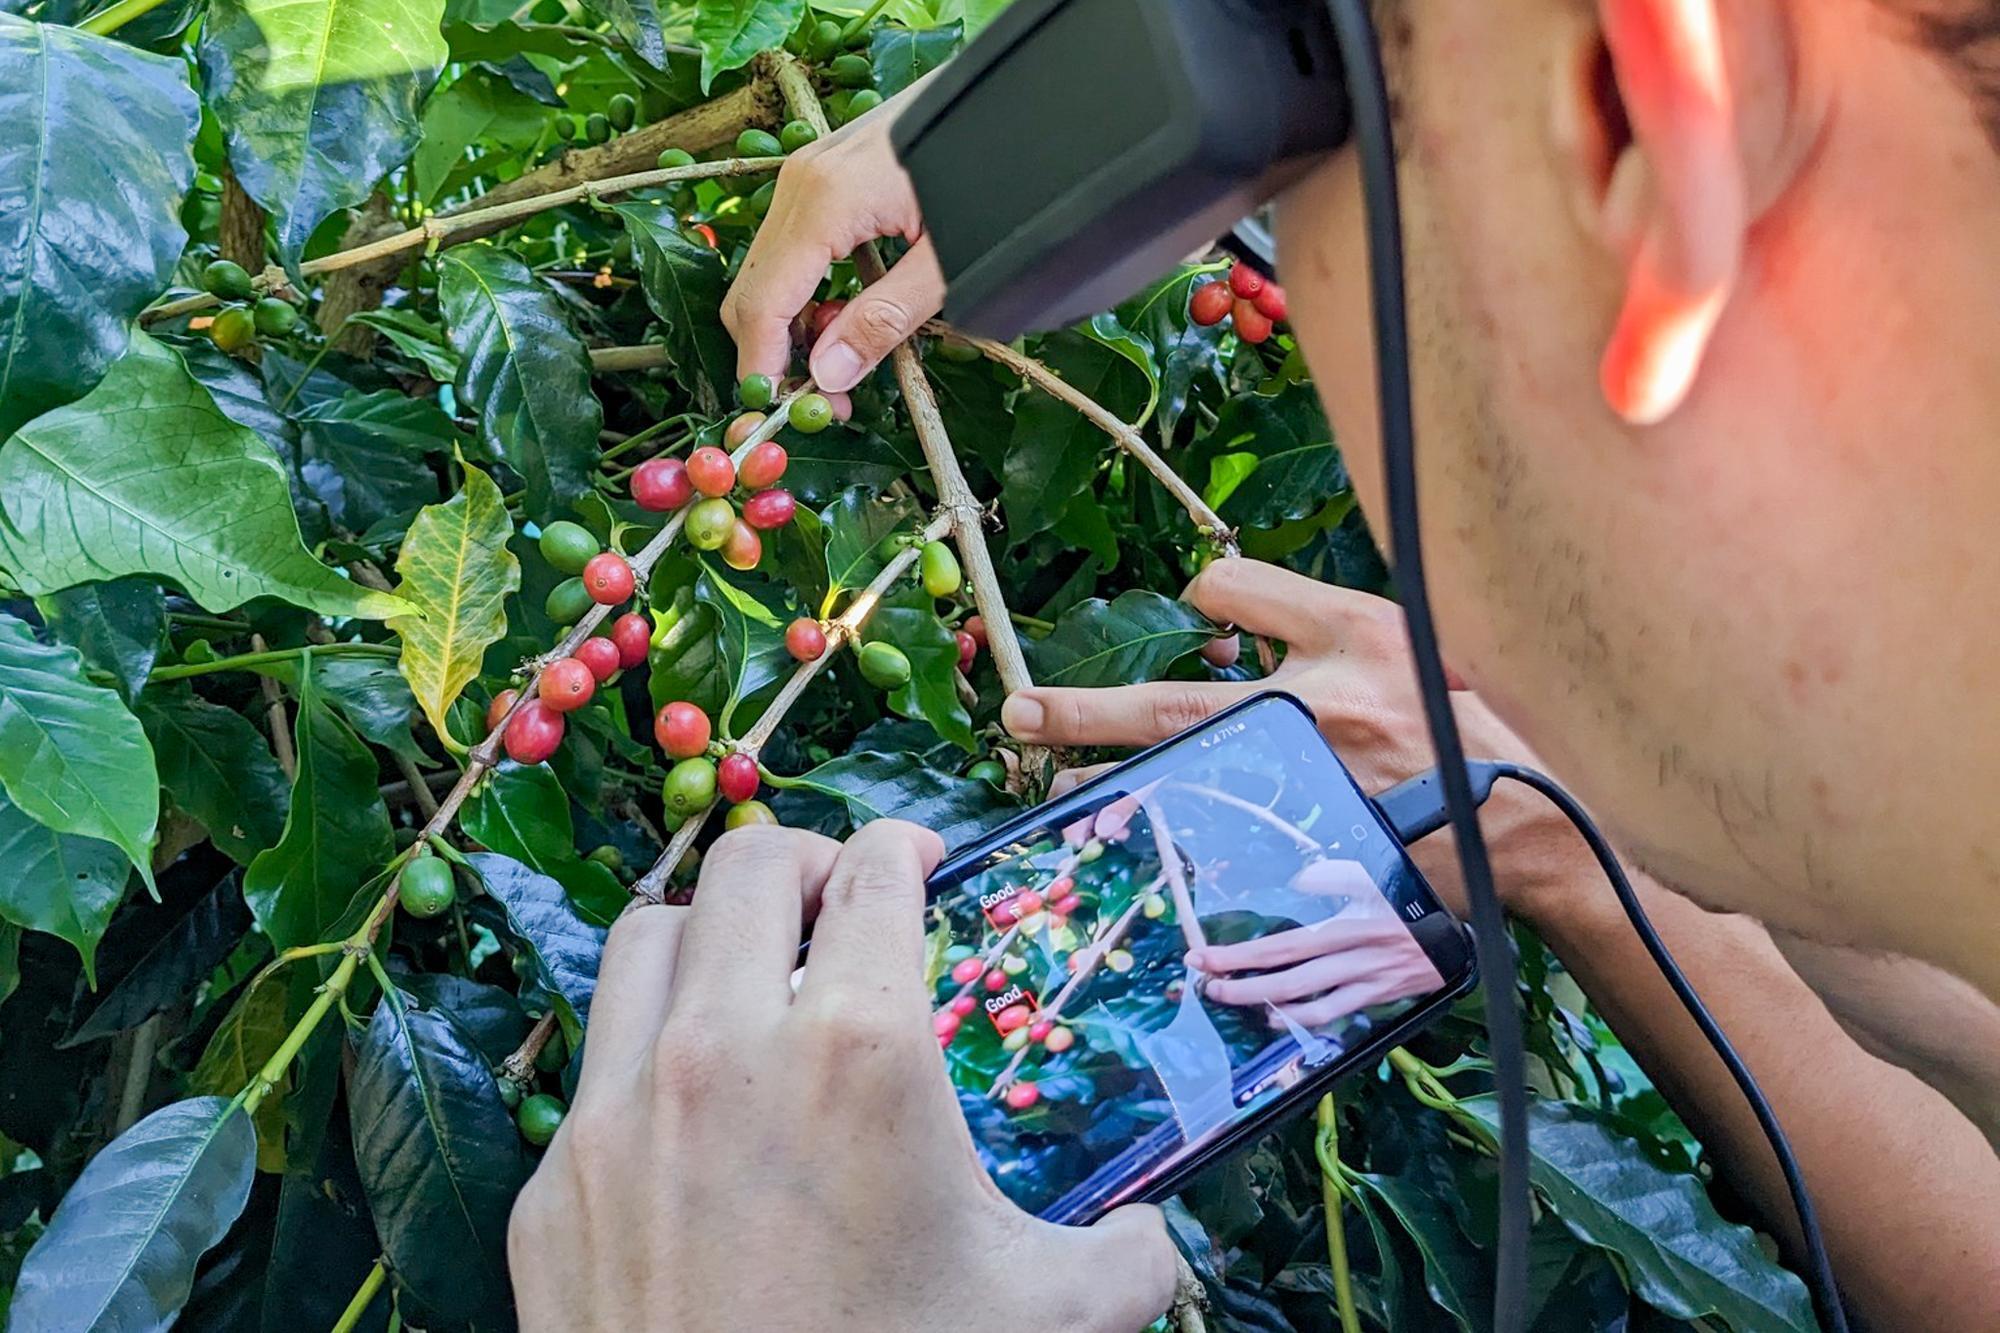 Utilizing AI recognition technology and smart glasses, Professor Nen-Fu Huang (黃能富) from the Department of Computer Science at NTHU educates children on determining when coffee beans are ripe for harvesting.